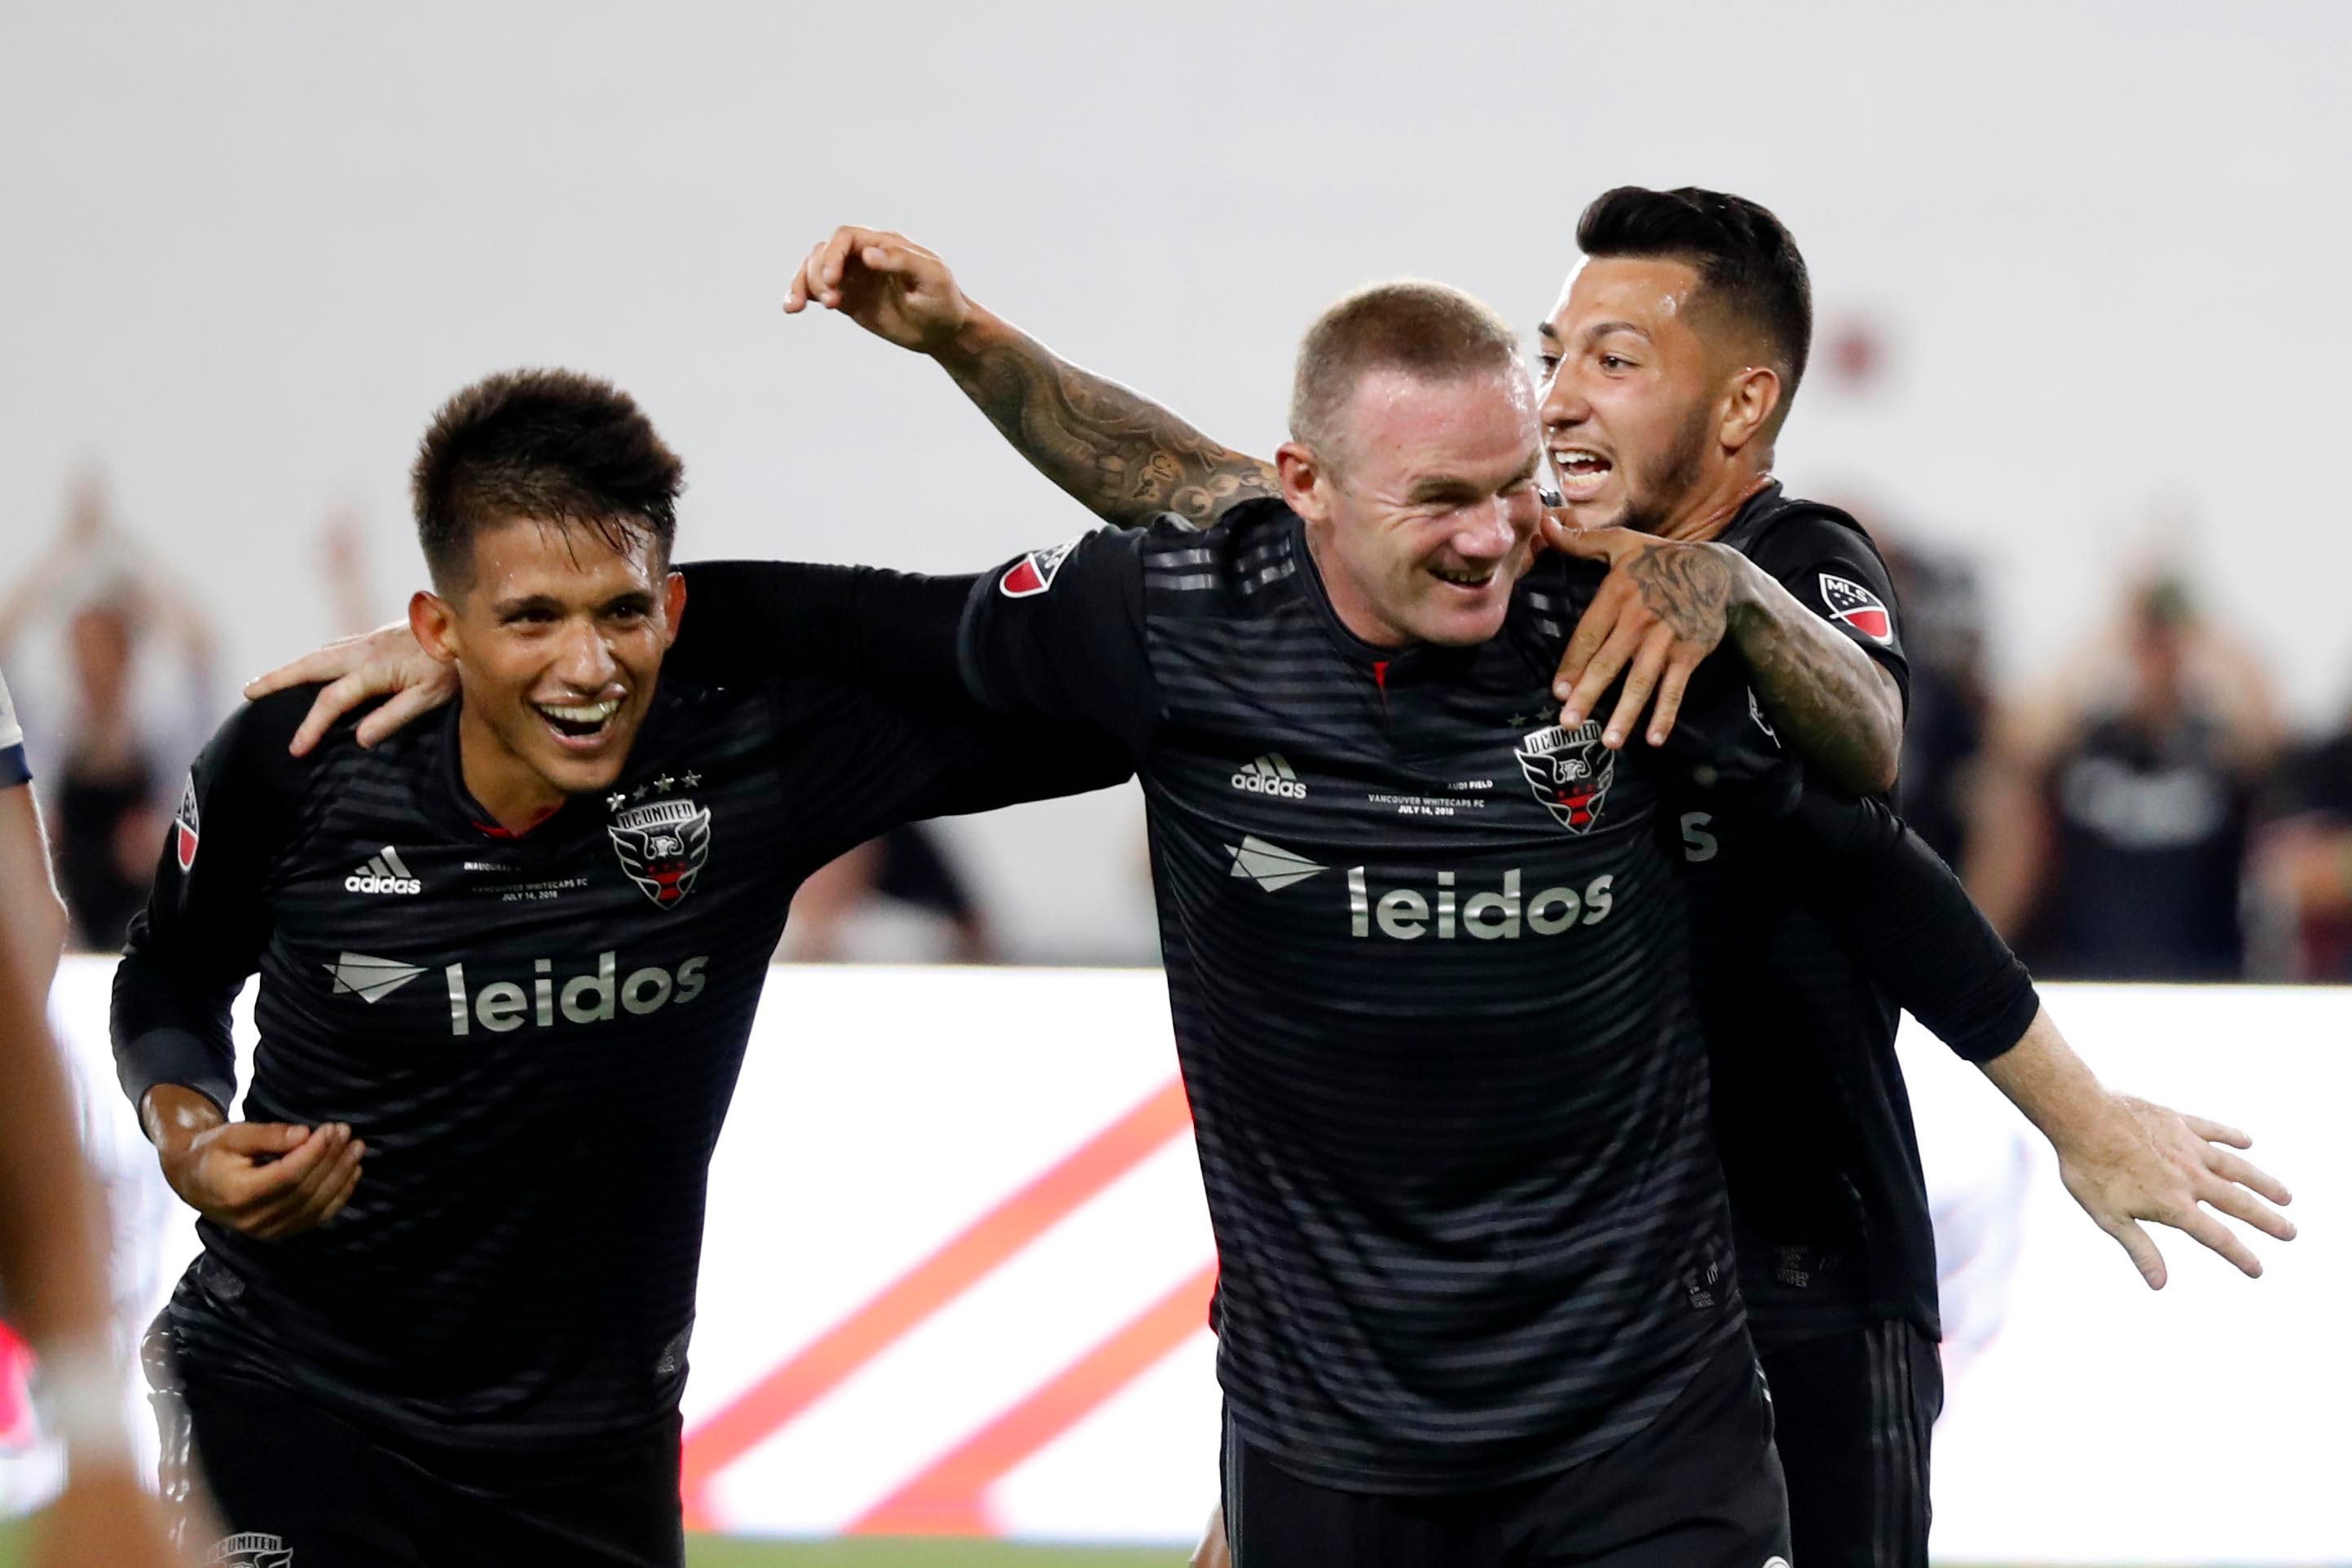 Wayne Rooney (right) celebrates a D.C. United goal with teammates during the inaugural game at Audi Field. D.C. United won the game, 3-1.